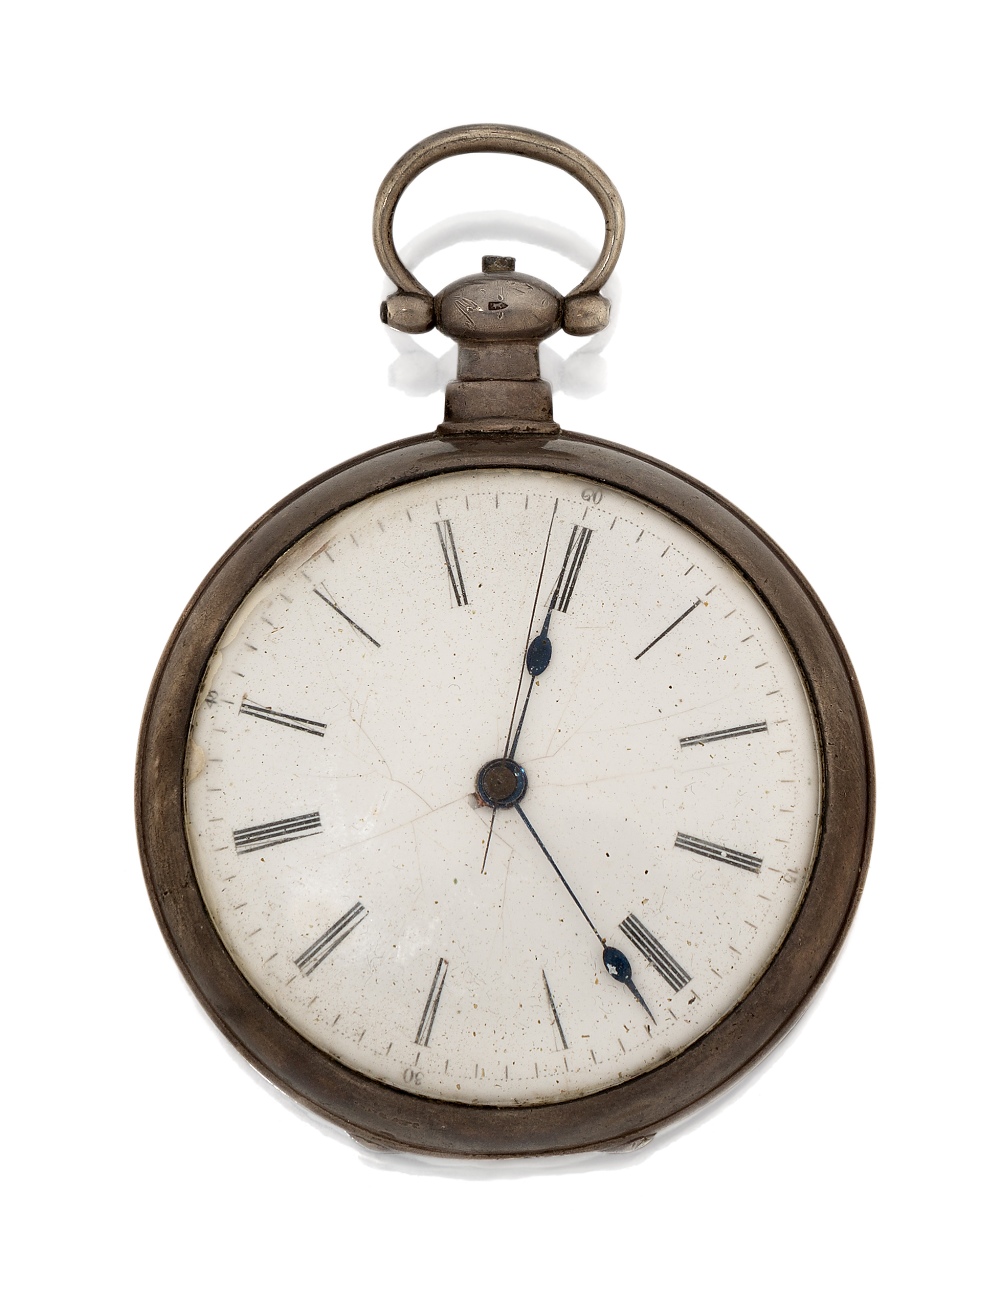 Bovet Fleurier, A 19th century silver openface pocket watch, by Bovet Fleurier, for the Chinese